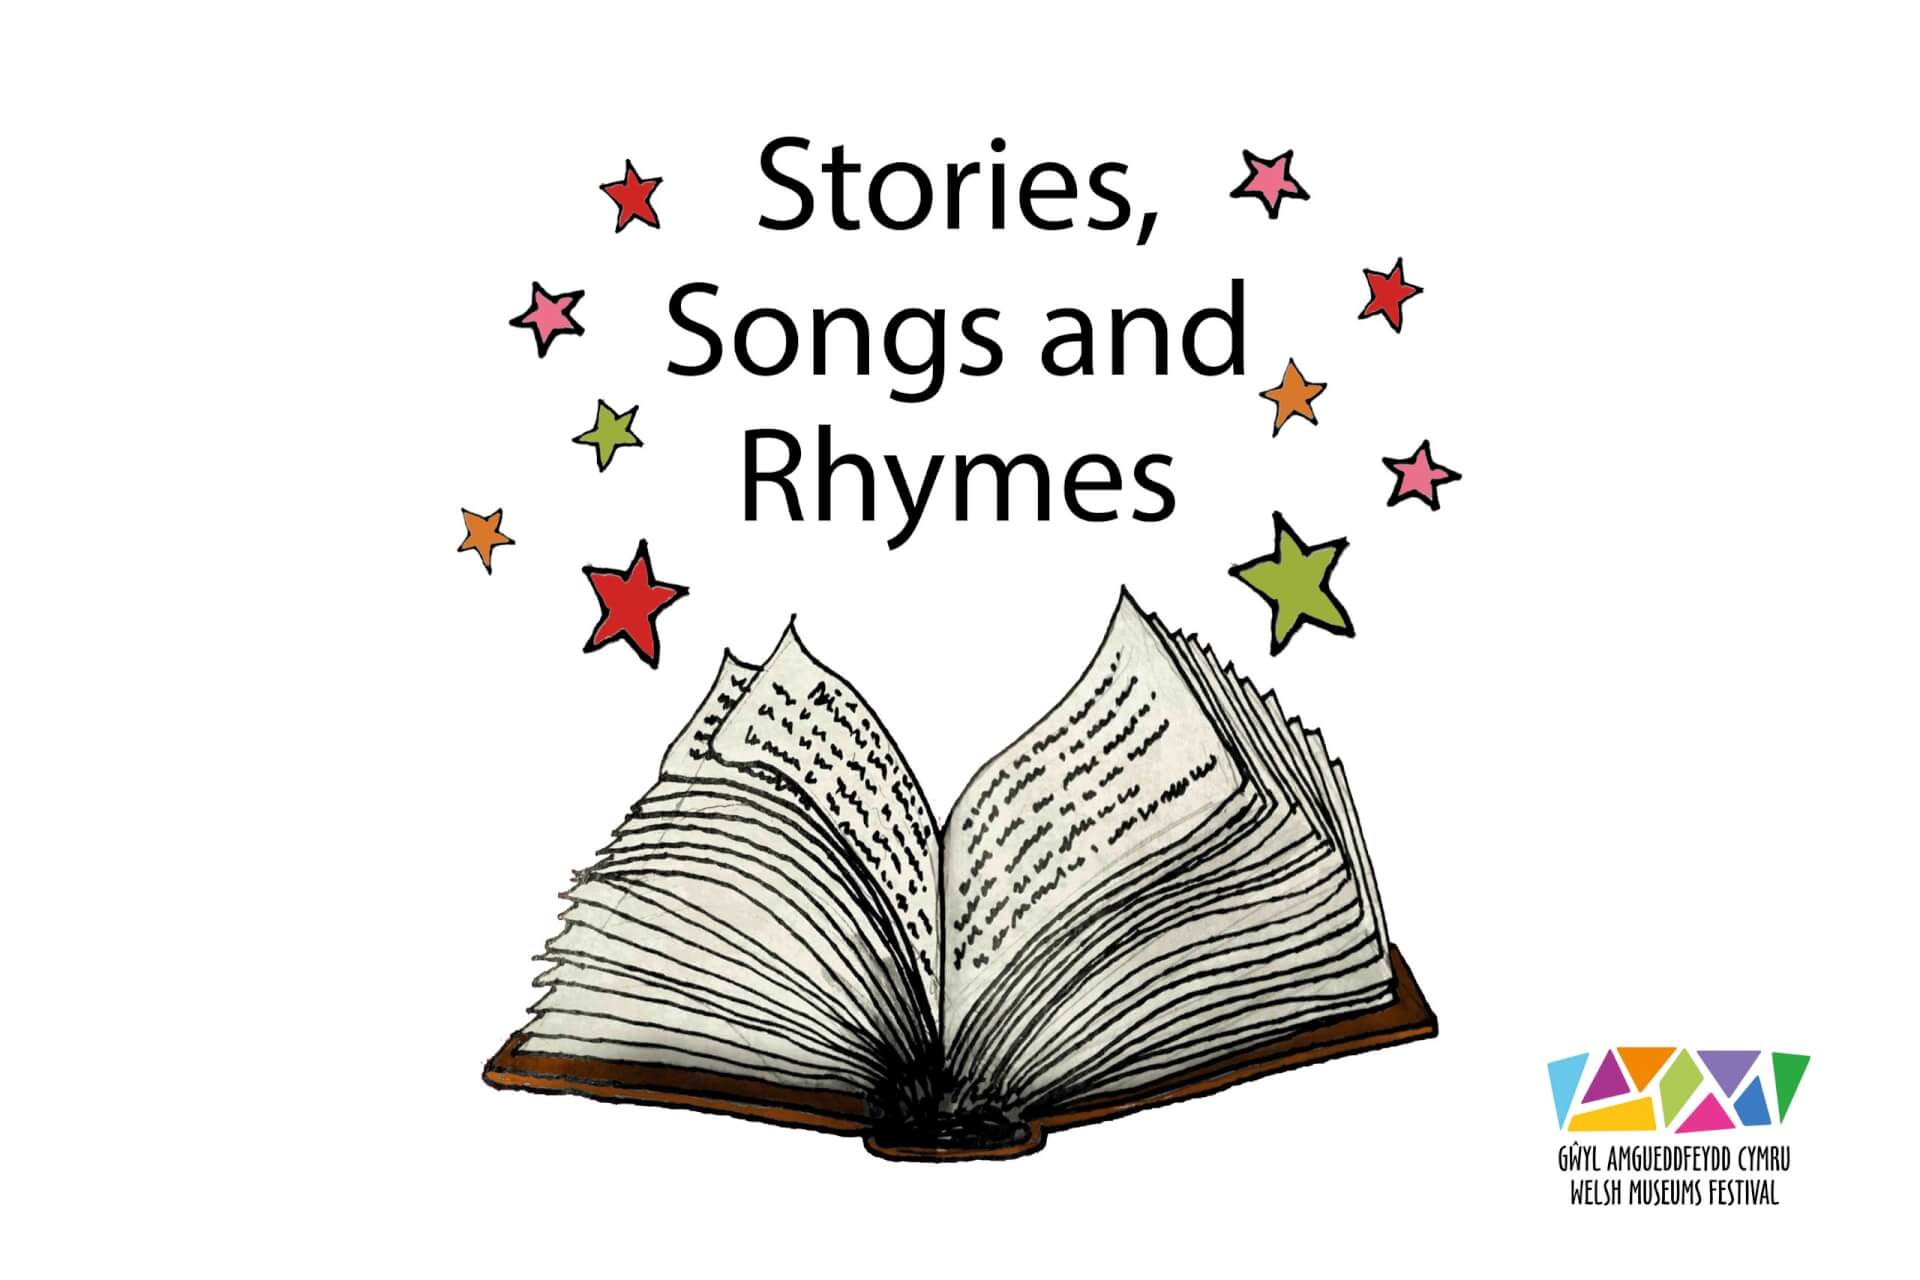 Stories, Songs and Rhymes